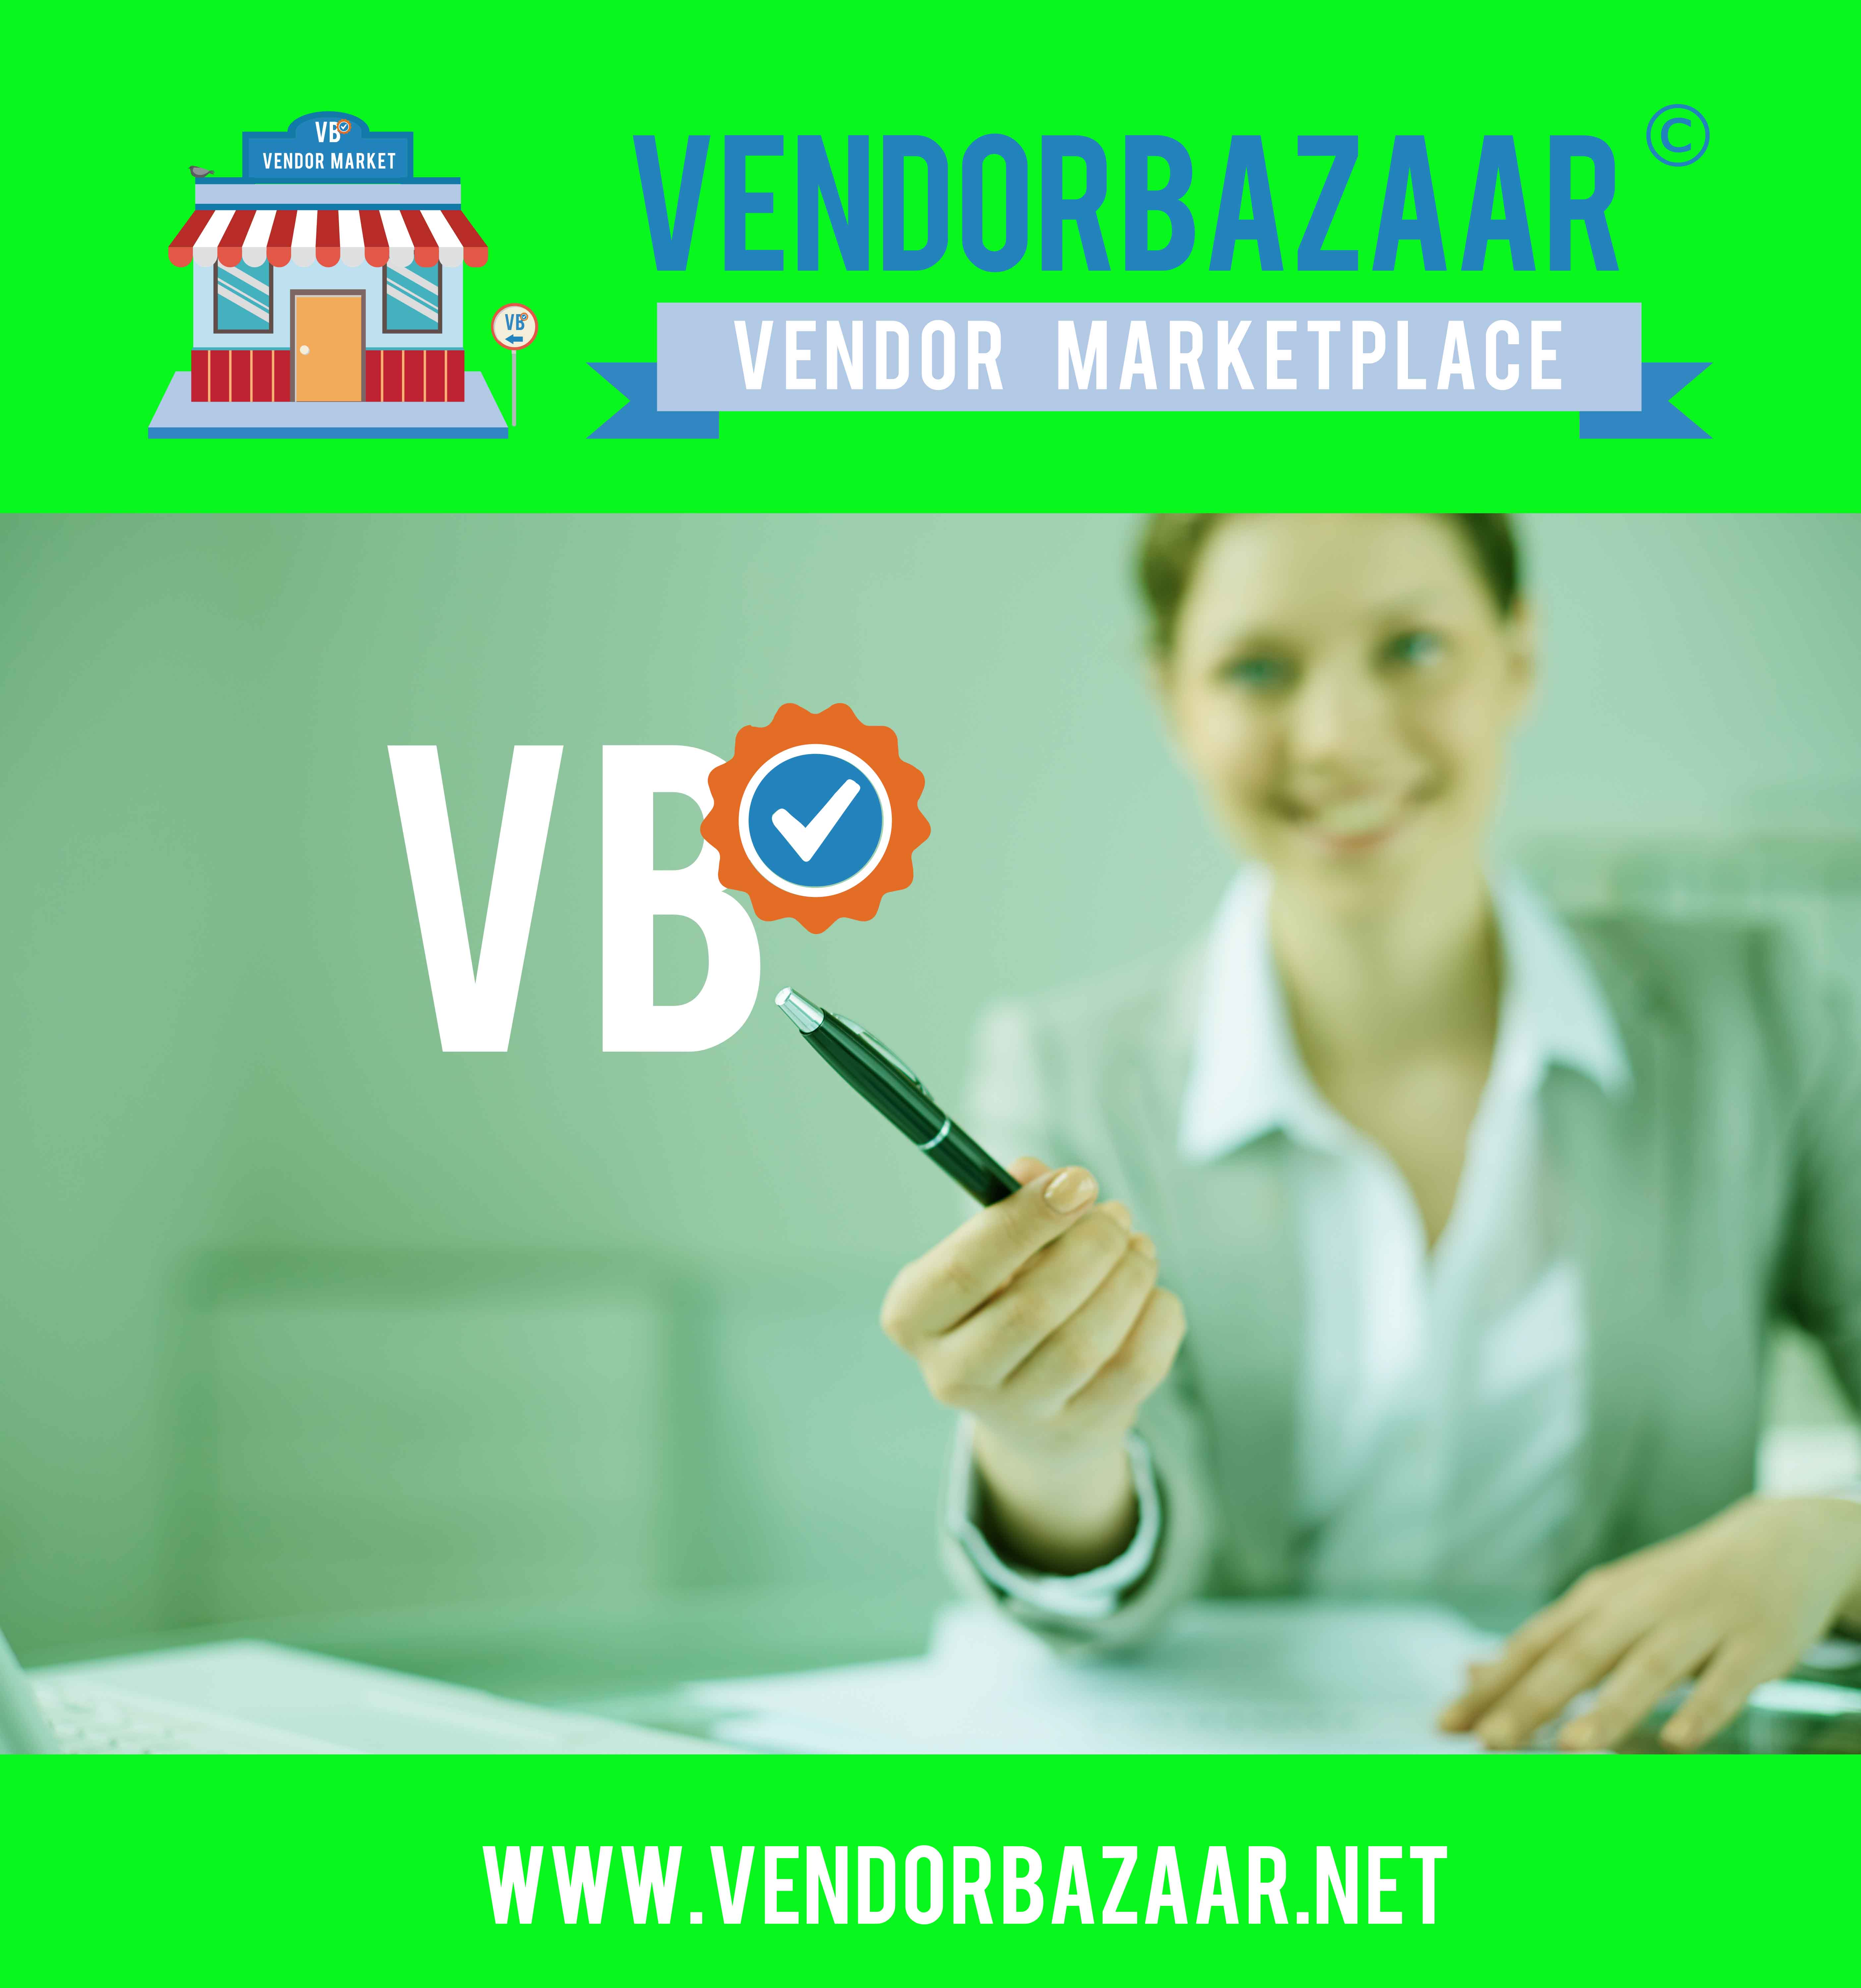 6 steps to select right vendor _Search at Vendor Marketplace Online